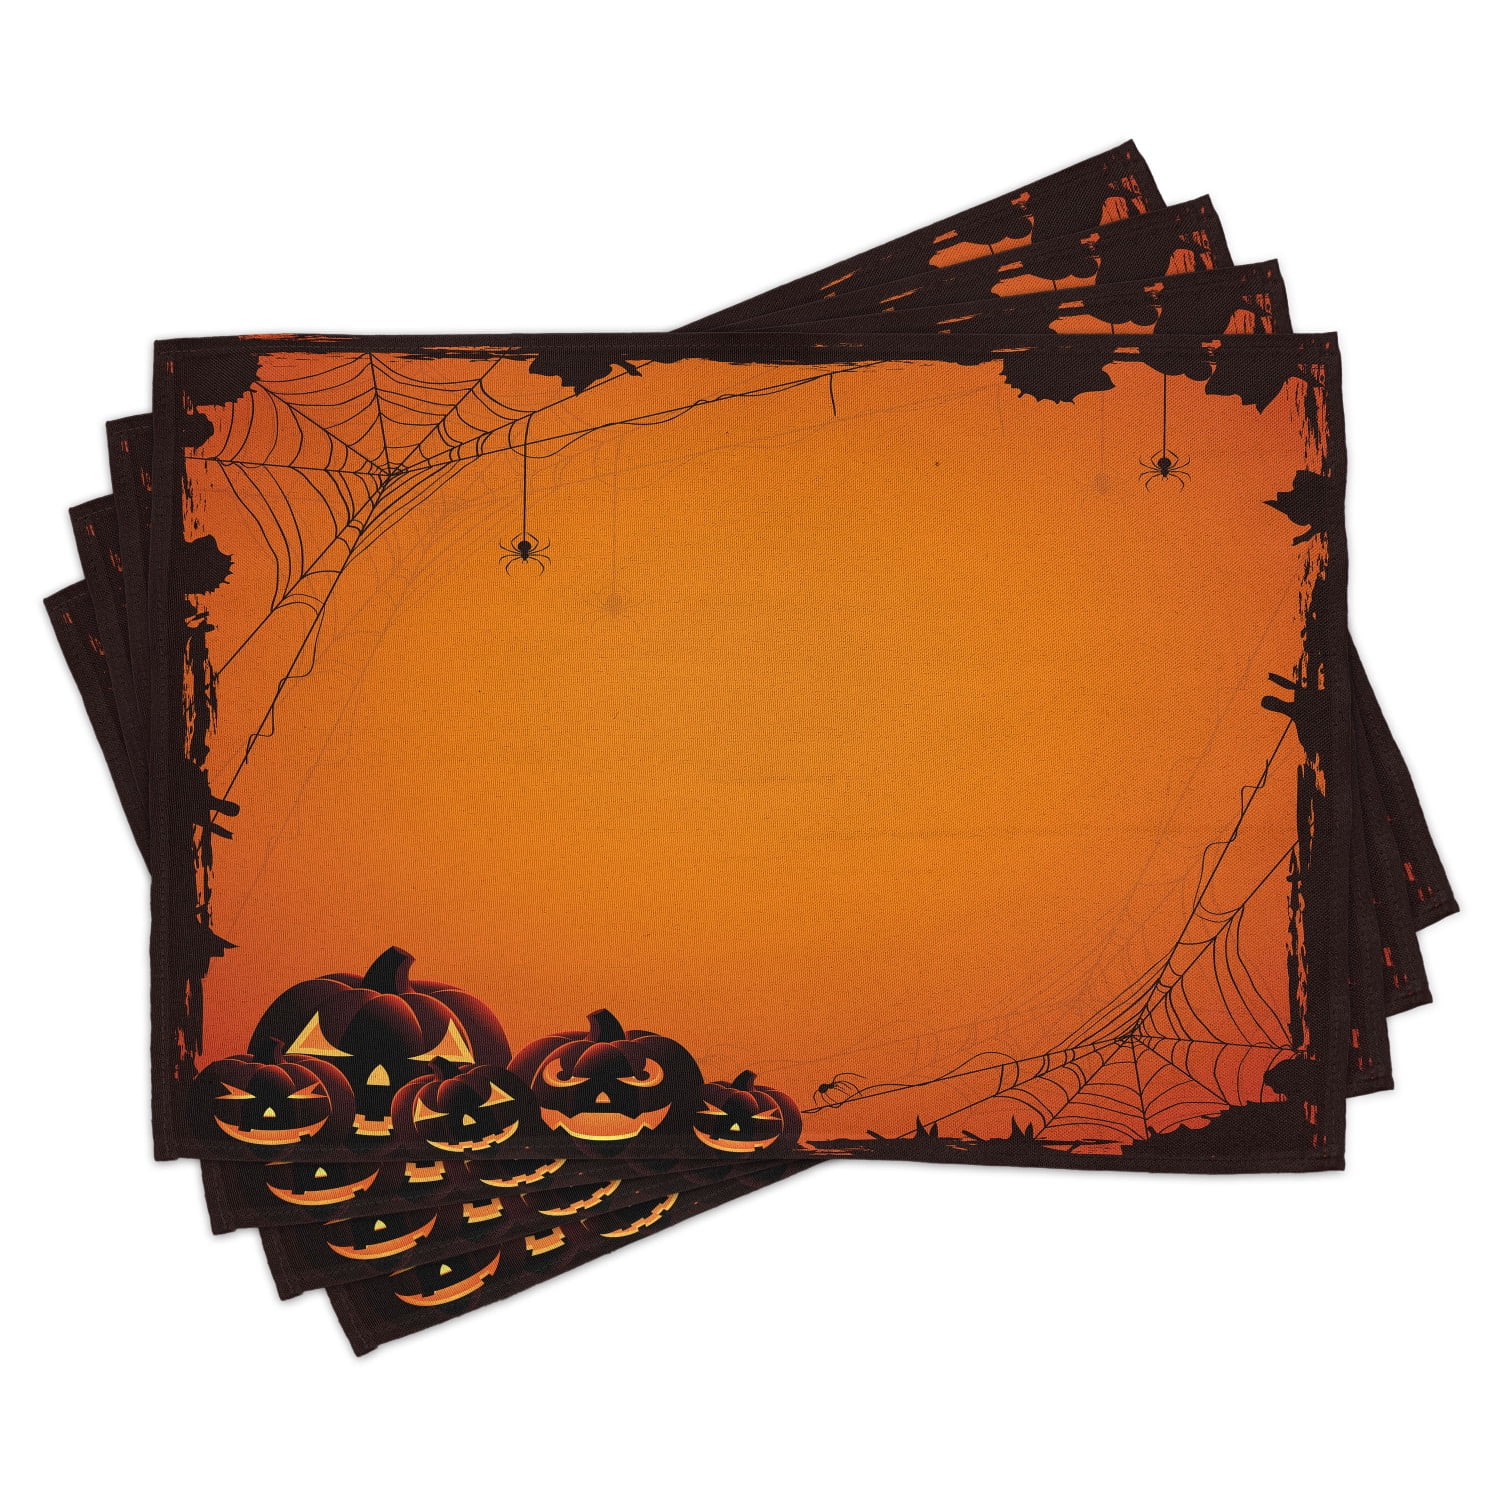 Halloween Placemats for Dining Table,12 x 18 Inch with Halloween Table Mats,Witch Gnome Pumpkin Jack-O-Lanterns Orange Table Decorations Washable Linen Heat Resistant Place Mat for Kitchen Set of 6 